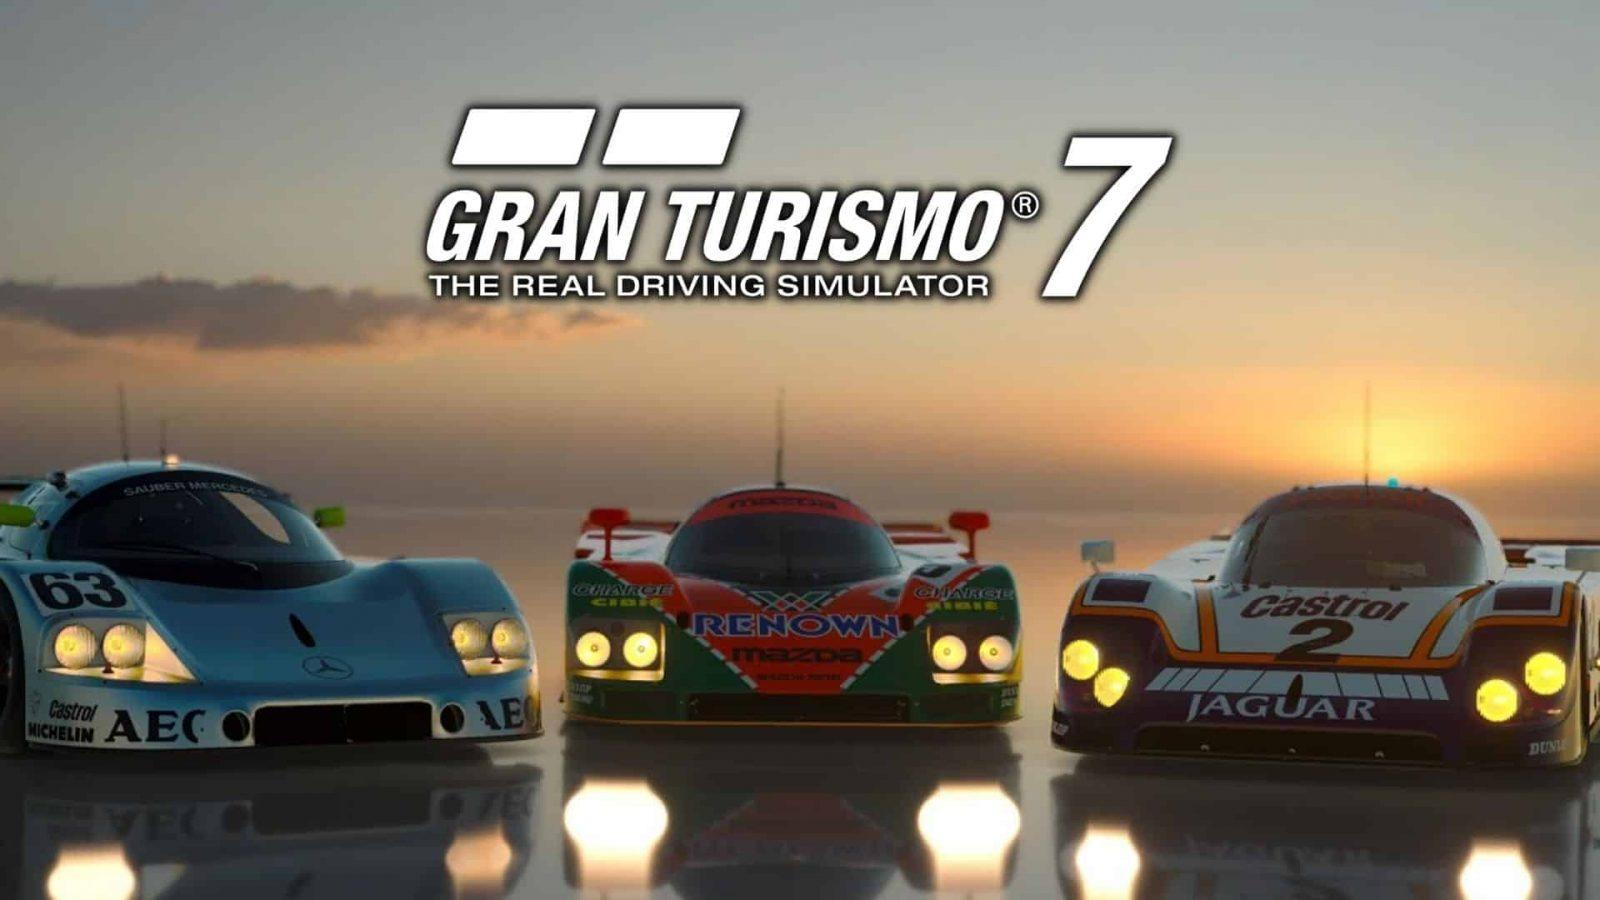 Gran Turismo 7 Meta Critic Reviews EXPOSE PlayStation Fanboy Hypocrisy!  Review Site Blacklisted?! 